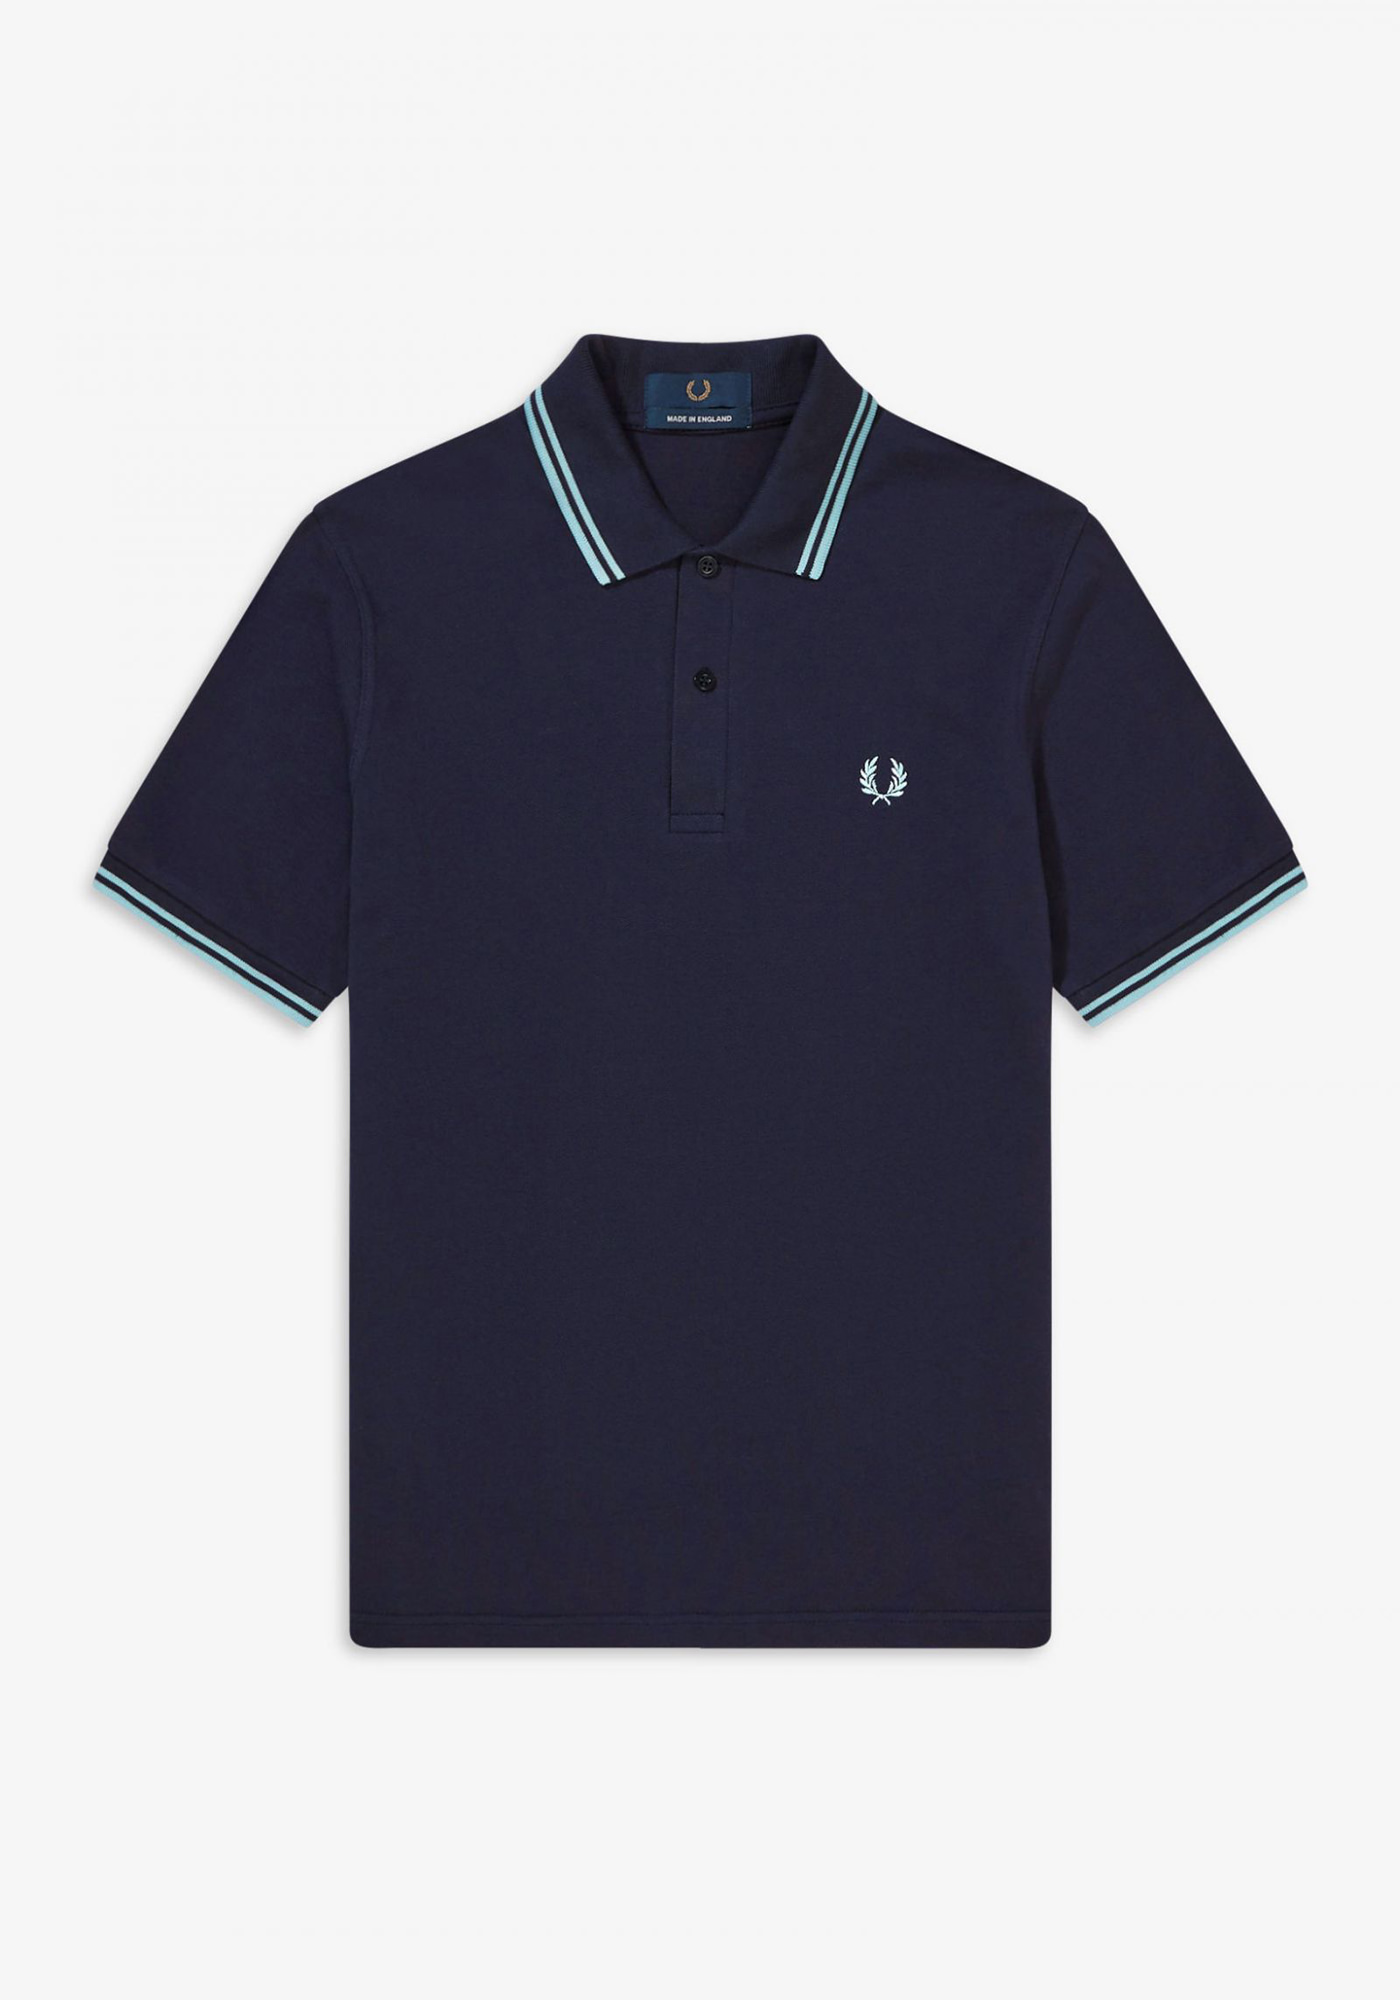 The Fred Perry Shirt - M12(36 157: BLACK / CHAMP / CHAMP)｜ FRED